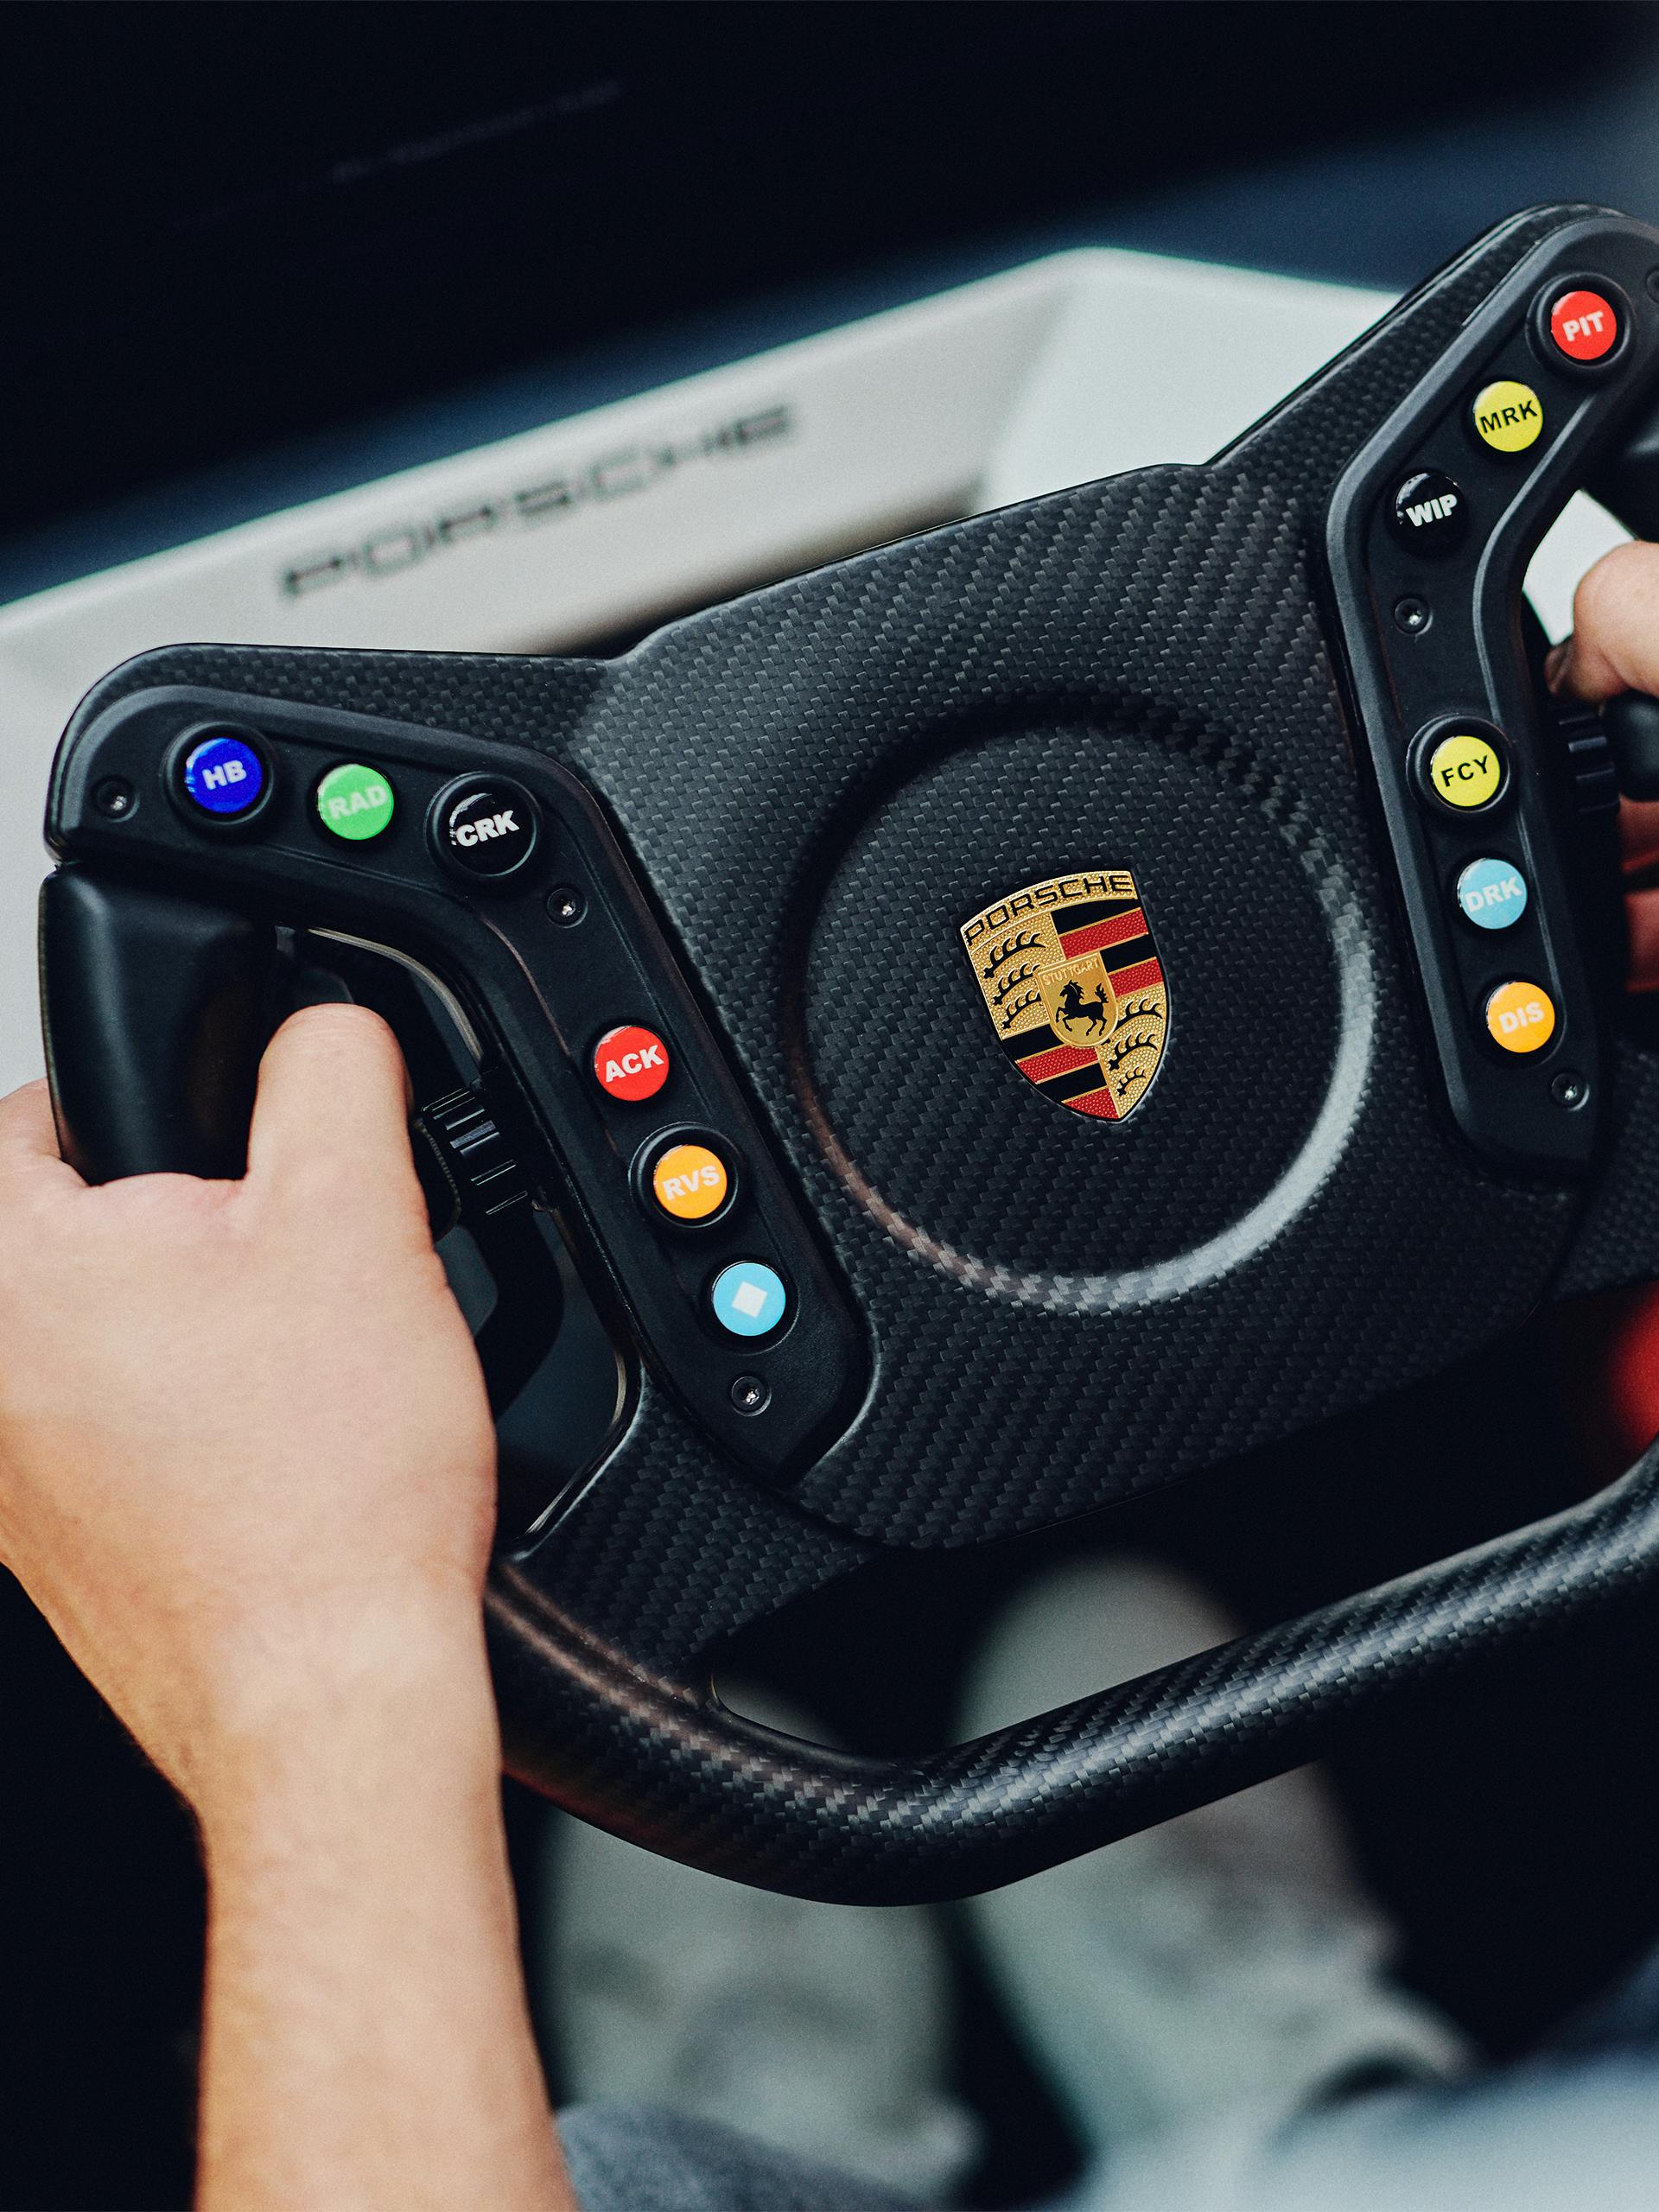 Frontal pictured is the new Porsche Gaming steering wheel in black color as it is currently in use.